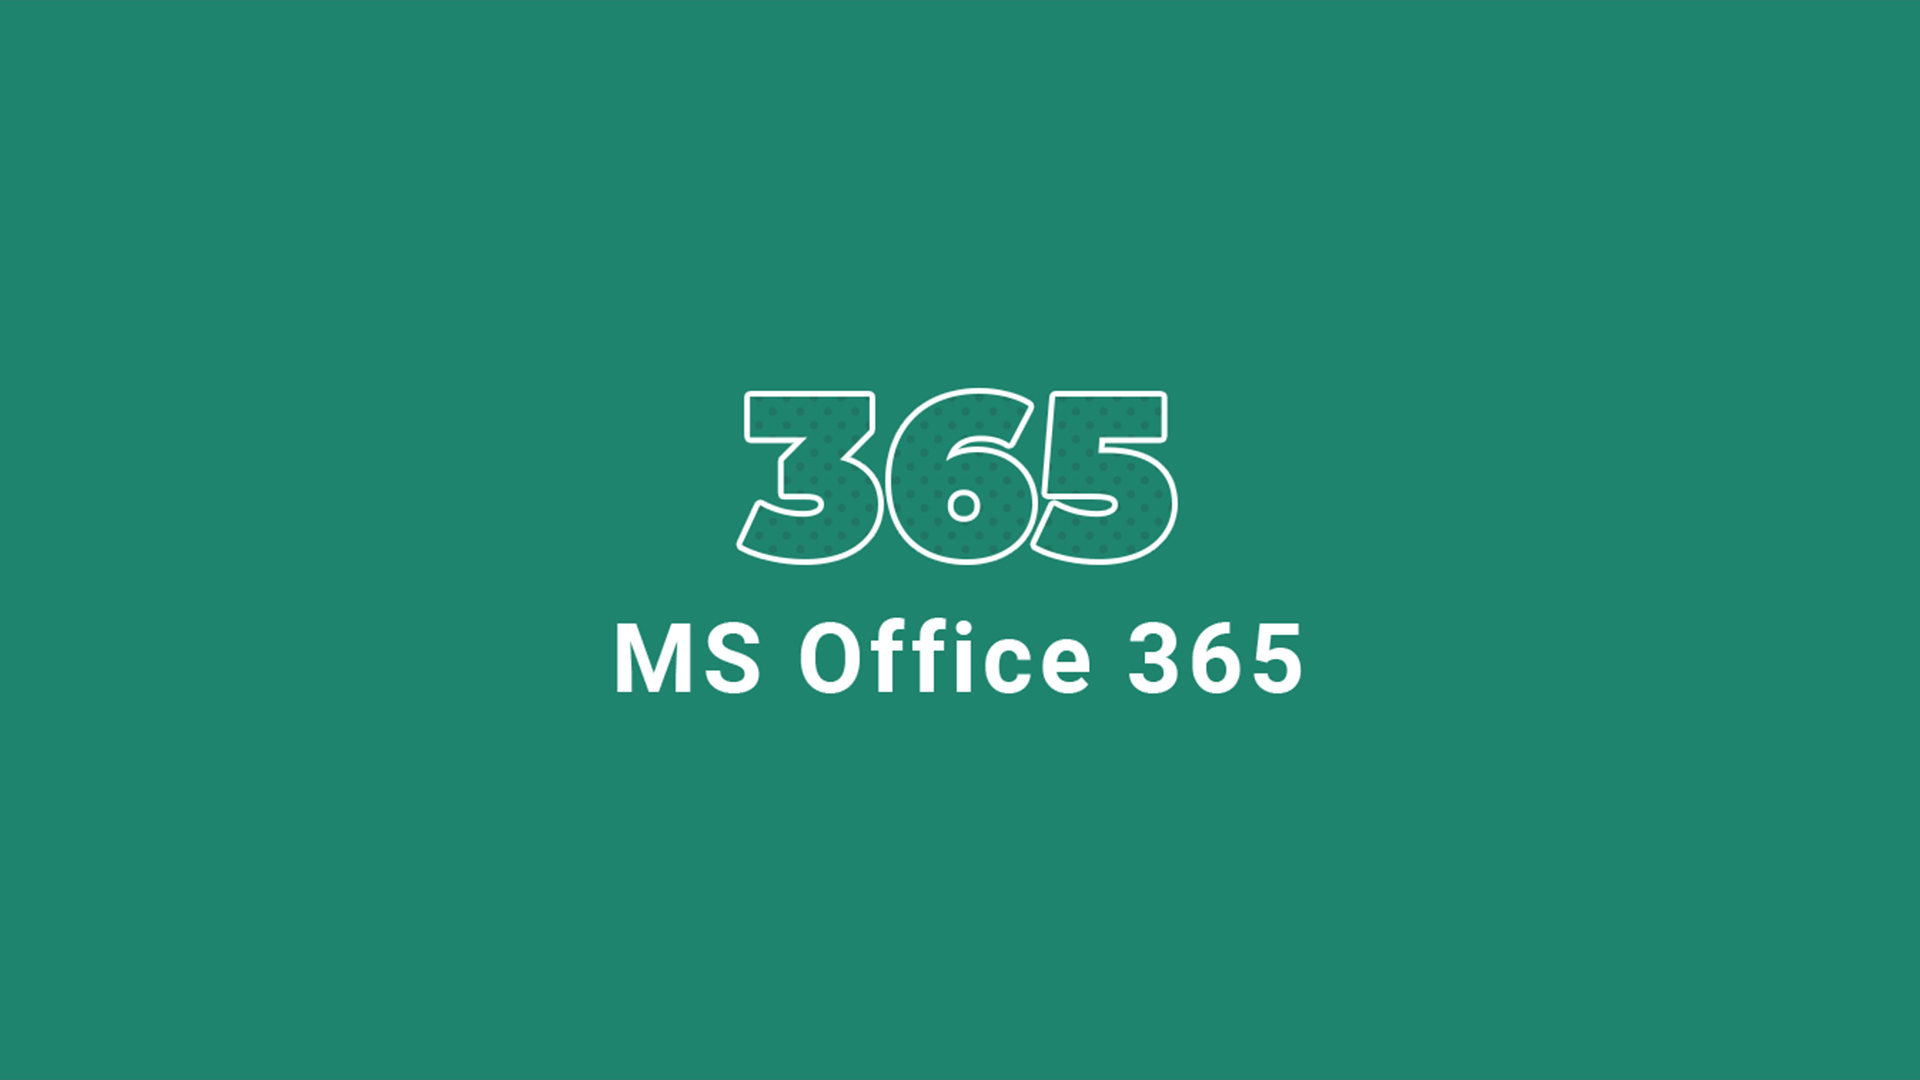 MS Office 365 Family Key (6 Months / 6 Devices), 56.49$